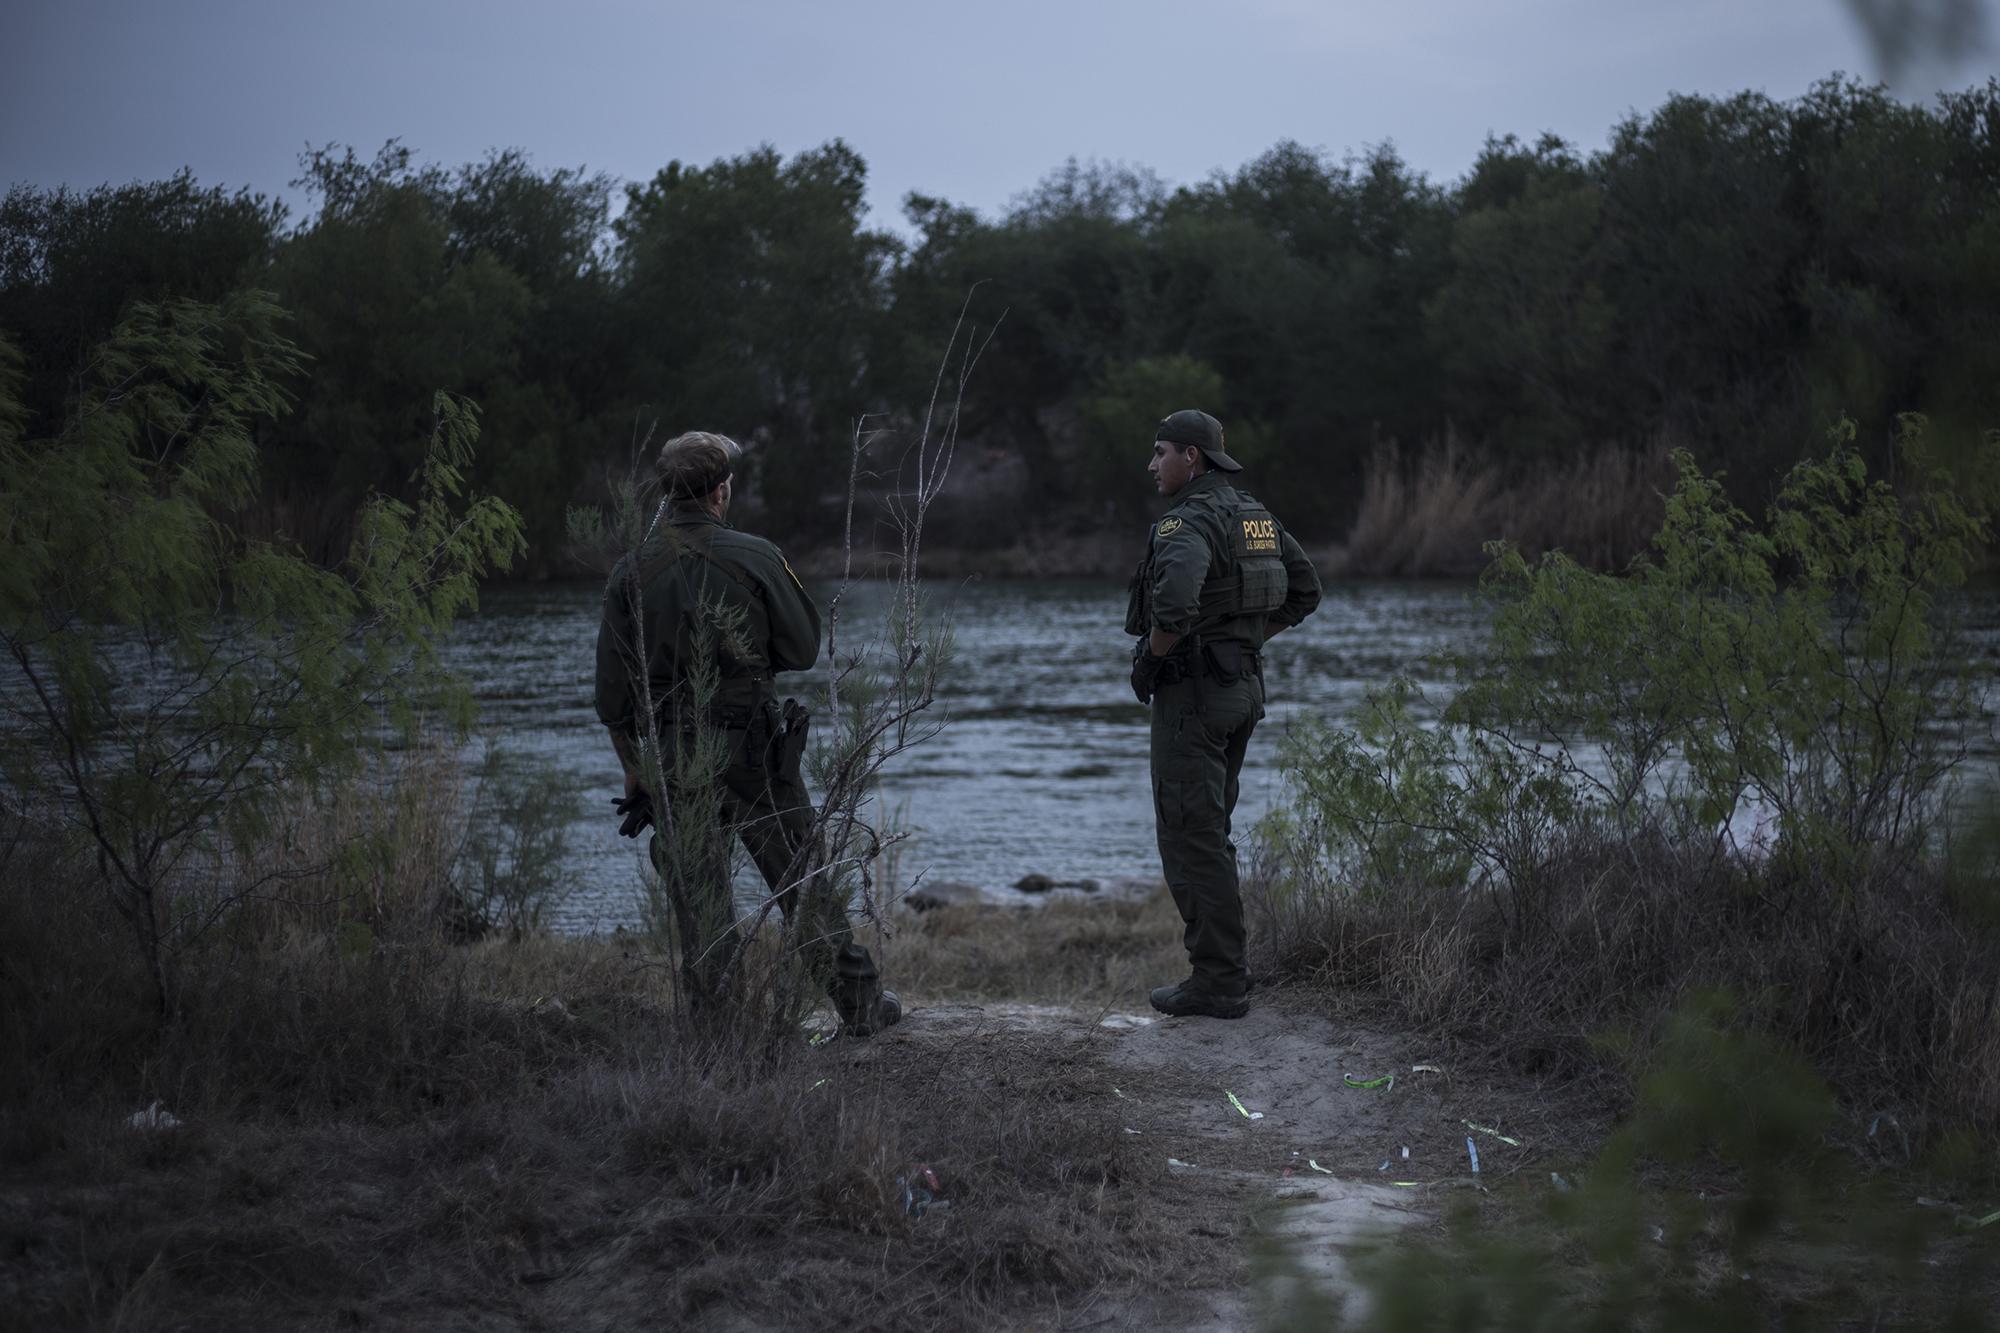 “You can’t cross today. The Texas Rangers are in the area and they’ll arrest you,” two Border Patrol agents yelled in Spanish to the smugglers inflating rafts on the other side of the river. “Don’t do it today. Wait until tomorrow,” they shouted. The agents left a few minutes later, and the migrants disappeared into the hills along the riverbank, perhaps to try at another spot.